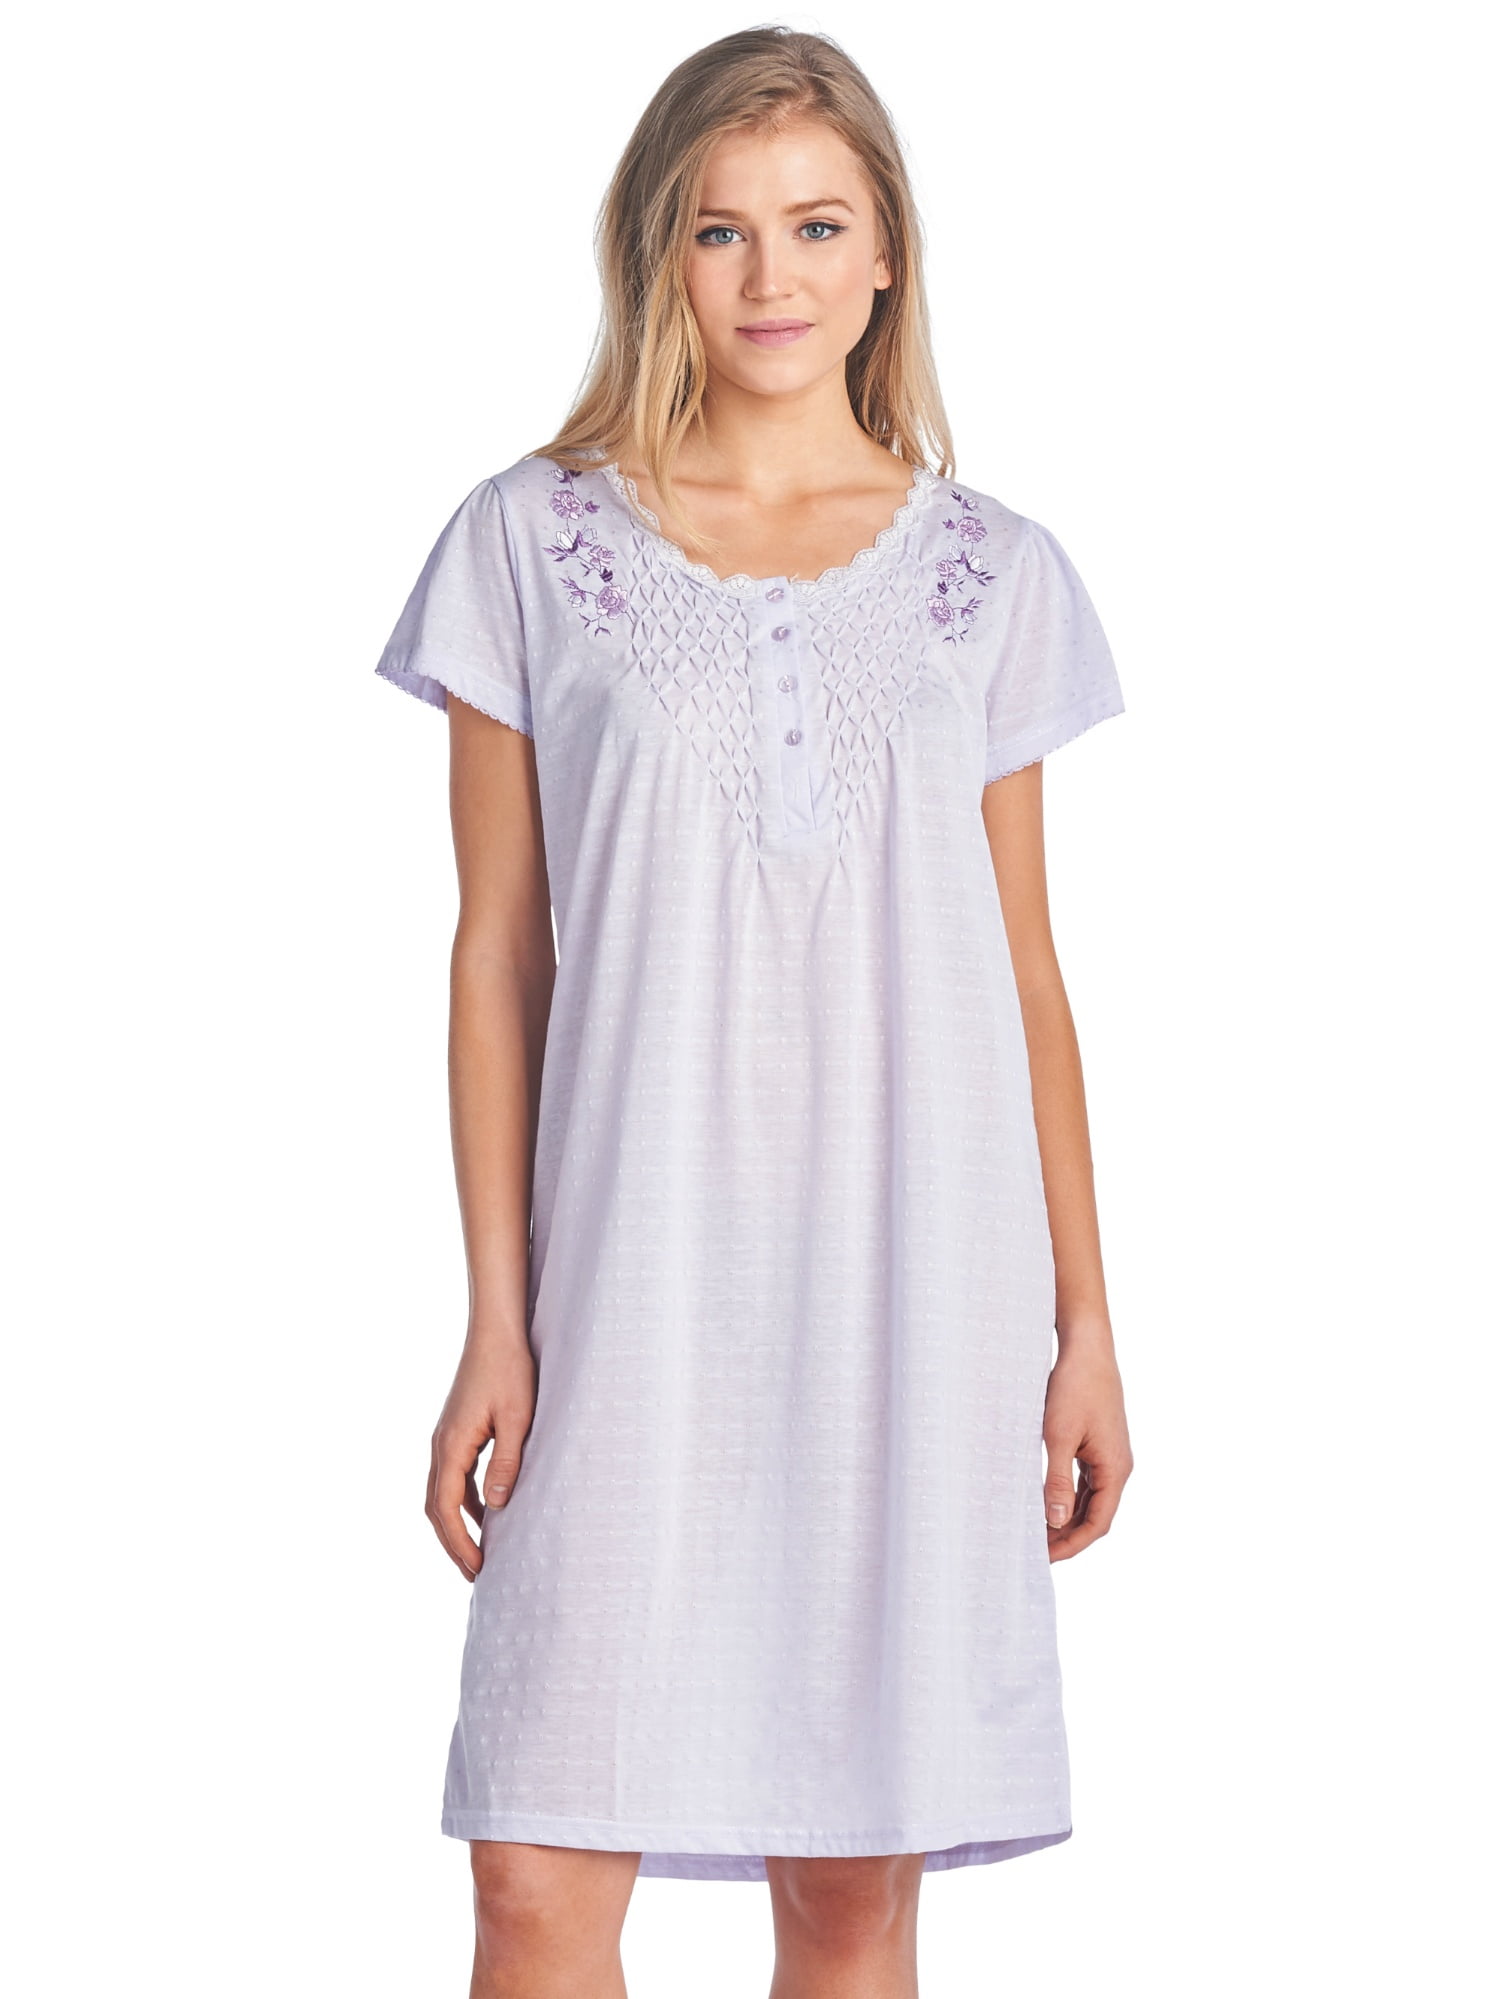 Casual Nights Women's Smocked Lace Short Sleeve Nightgown Purple 4X